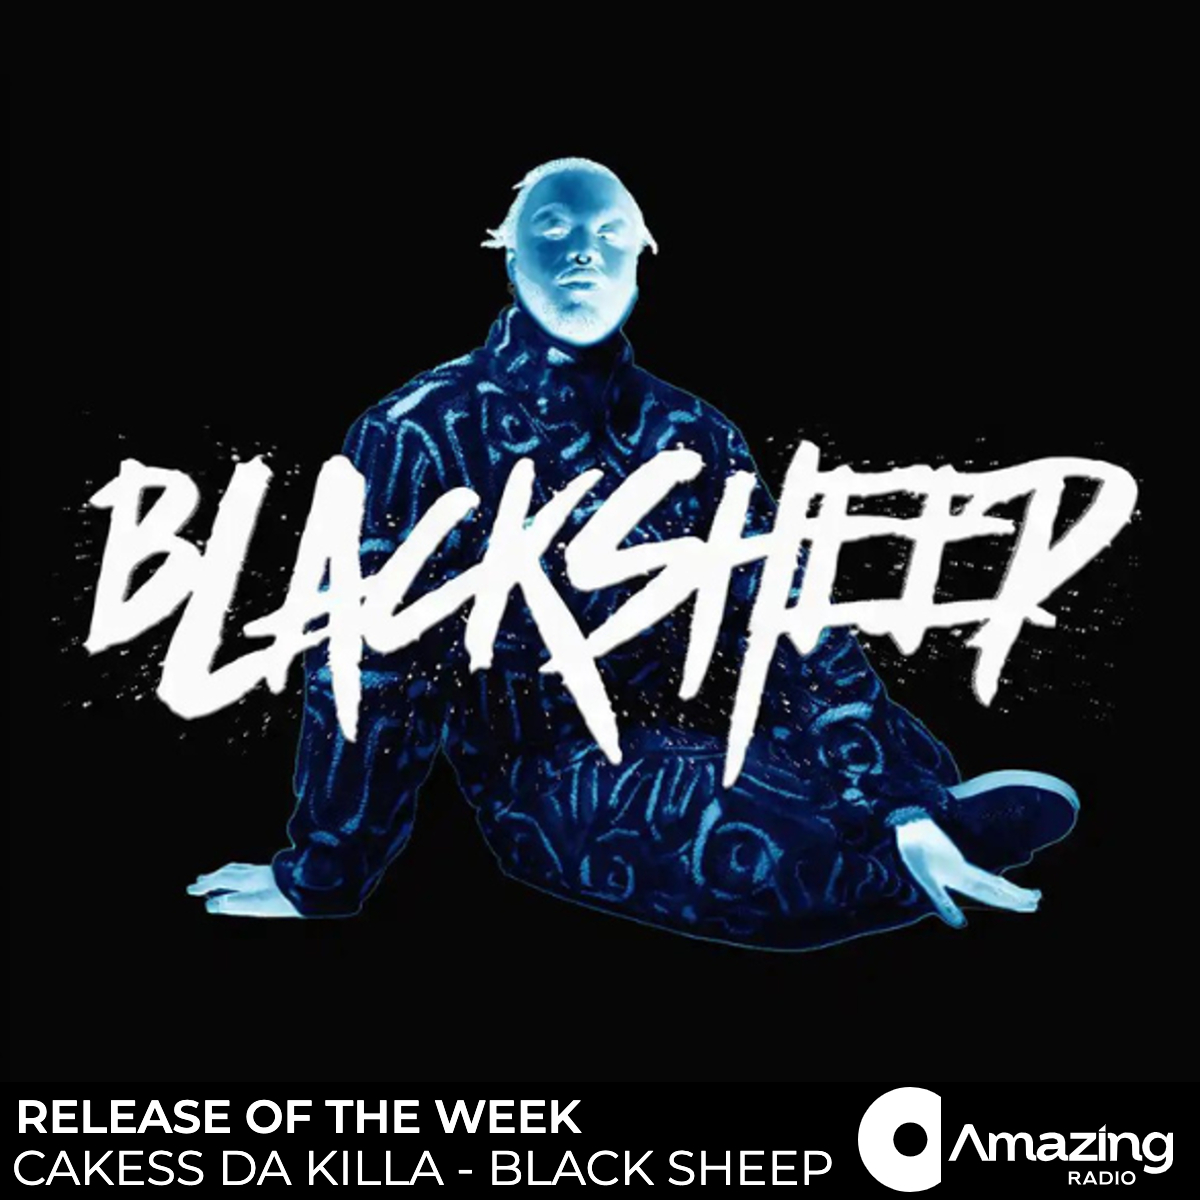 As darkness looms in our global conditions, @CakesDaKilla offers new avenues to escape; not of negligence, but of recovery to continue fighting. 'Black Sheep' is our Release of the Week! We are playing it, in full, this Friday, at 11am PT / 1pm CT / 2pm ET, on @AmazingRadioUSA!